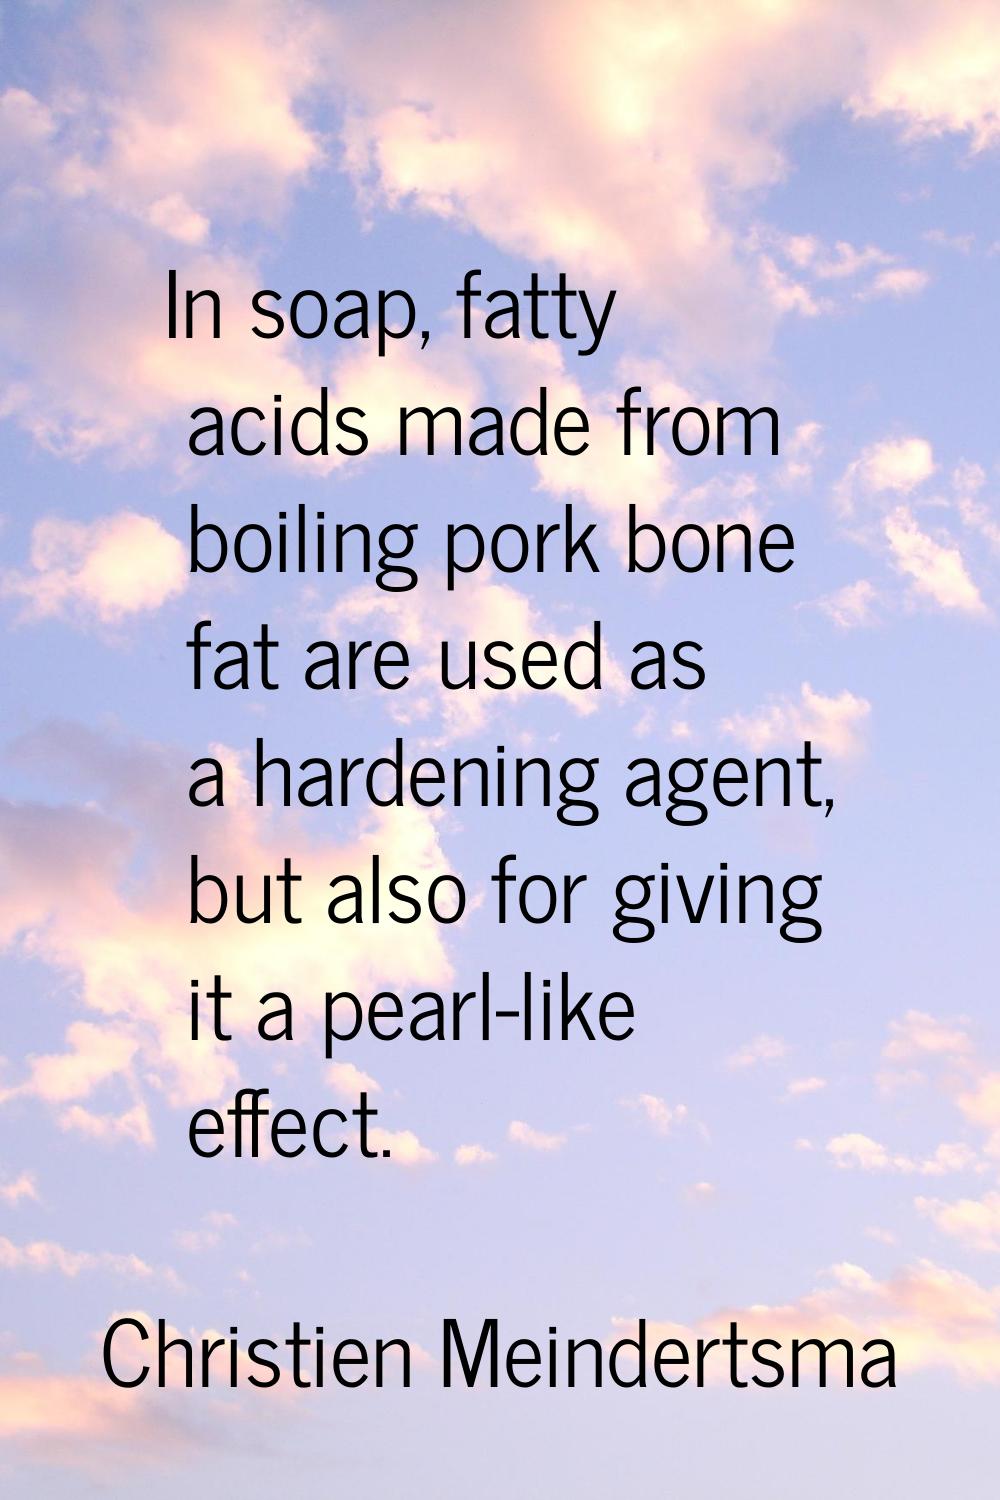 In soap, fatty acids made from boiling pork bone fat are used as a hardening agent, but also for gi